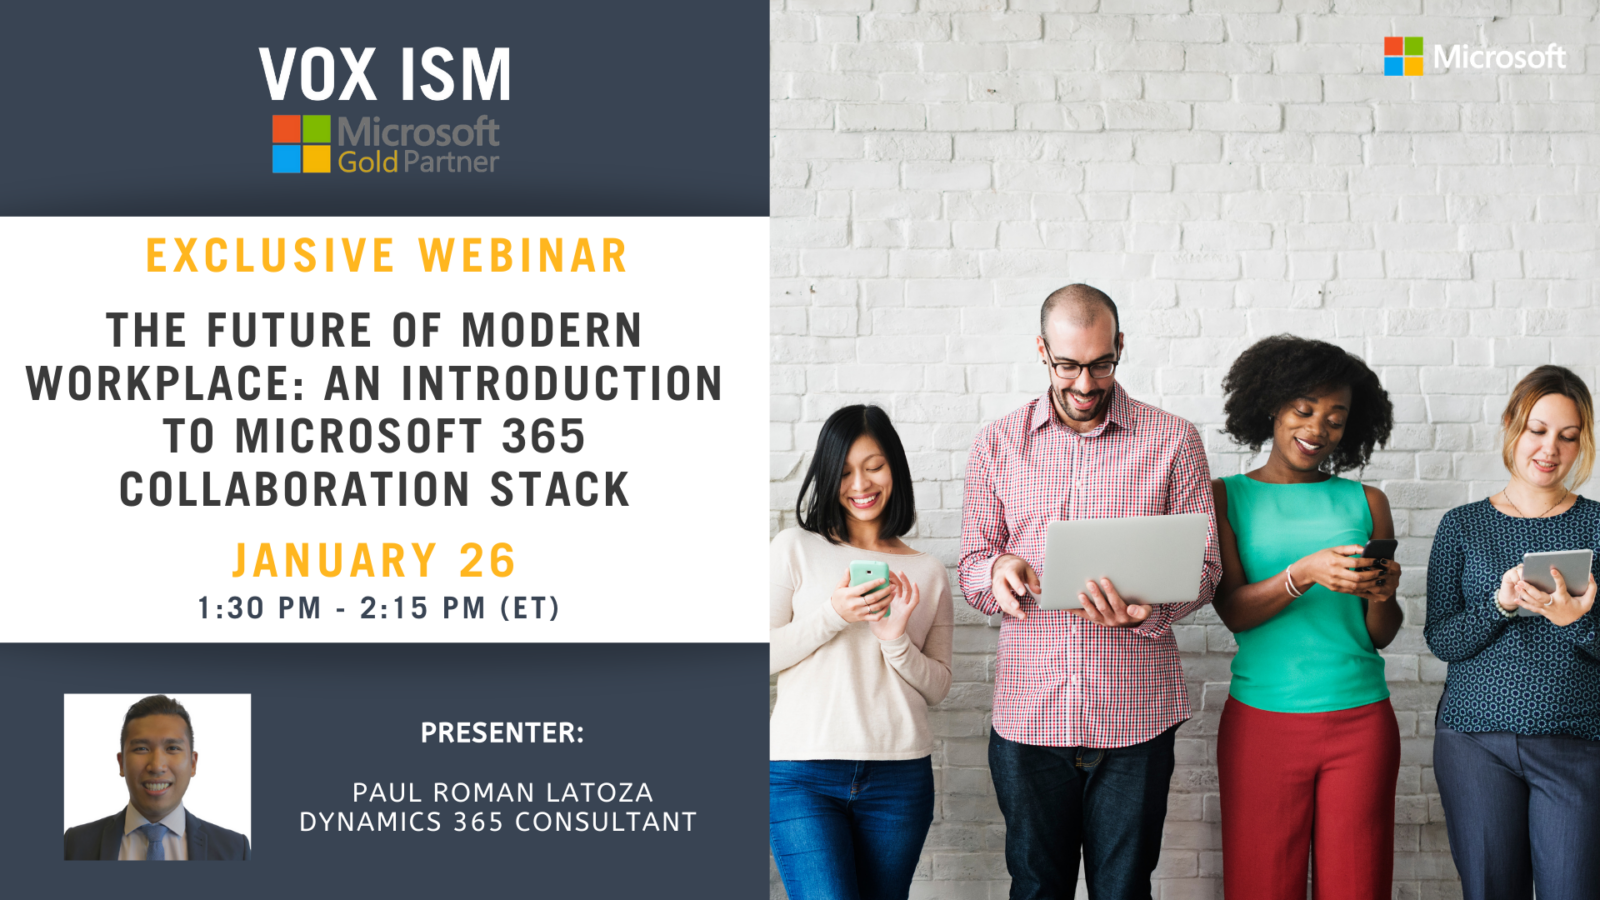 The Future of Modern Workplace: An Introduction to Microsoft 365 Collaboration Stack - January 26 - Webinar